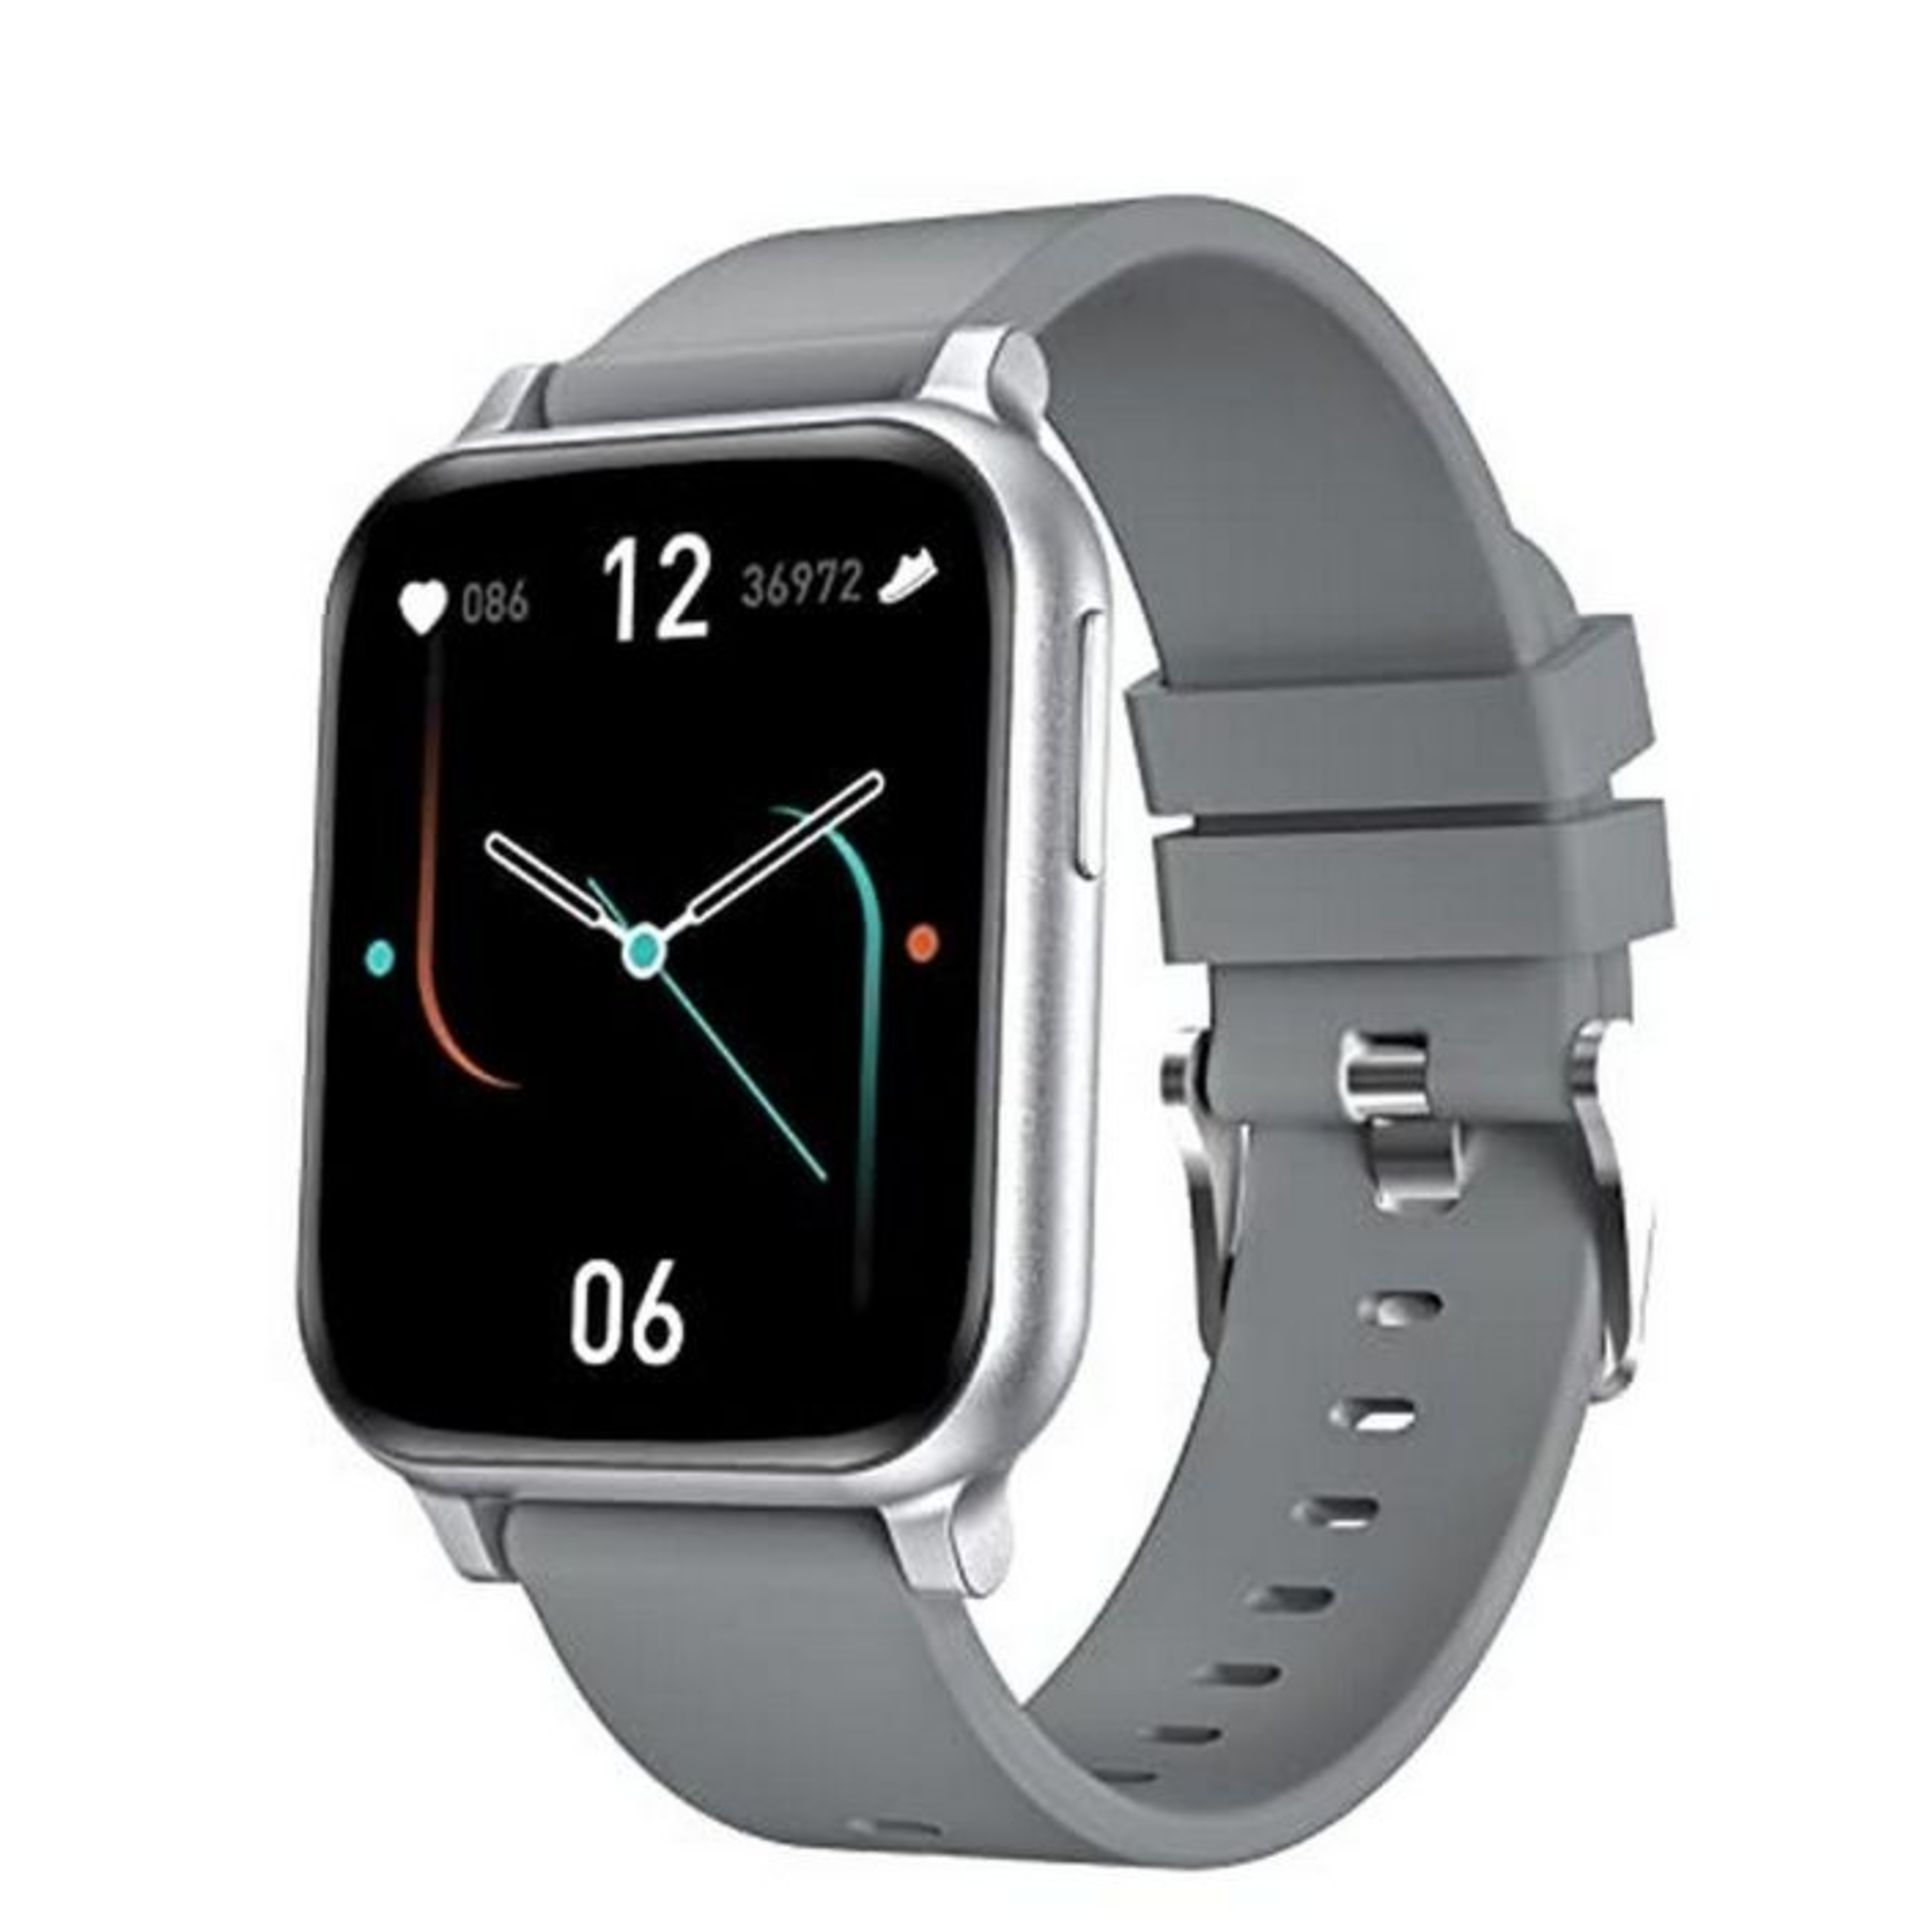 RRP £18.97 AiMoonsa Smart Watch for Android and iOS Phone with 1.69" Touch Screen - Image 2 of 4